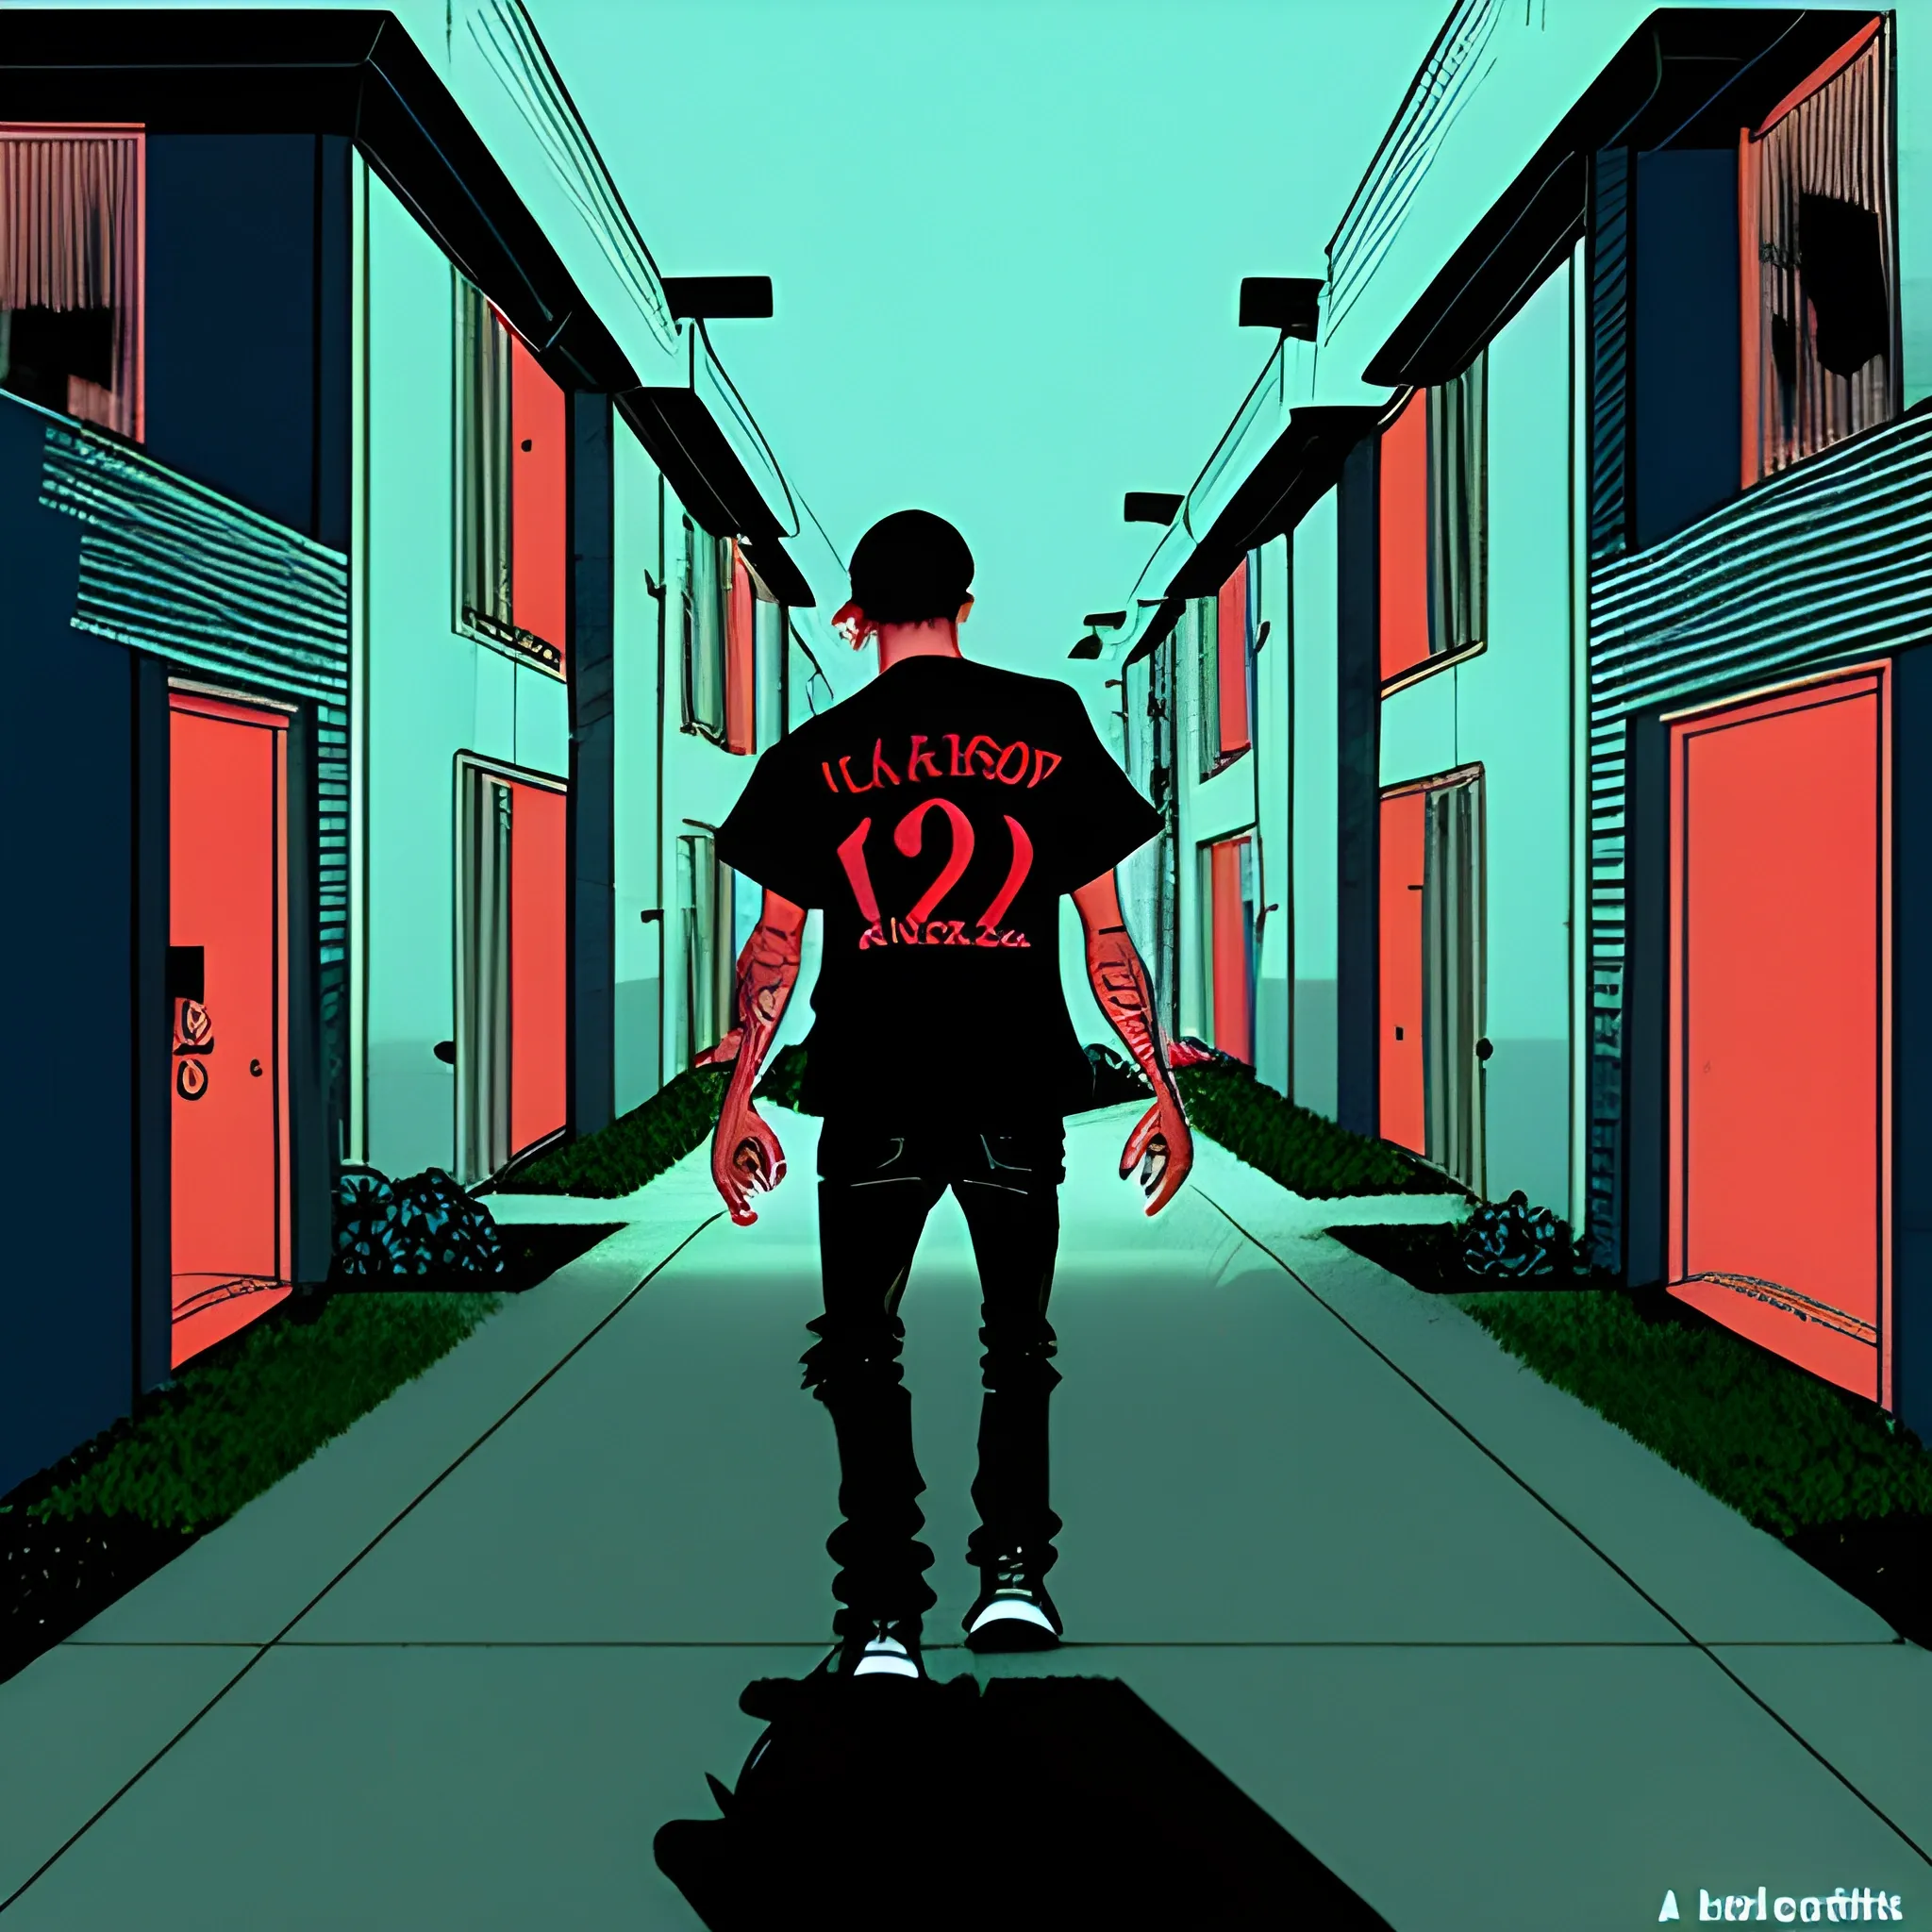 A 21-year-old blood gang member walking backwards through an American housing project, at night. With a 90's video game font title "Moving Backwards".  Cartoon

